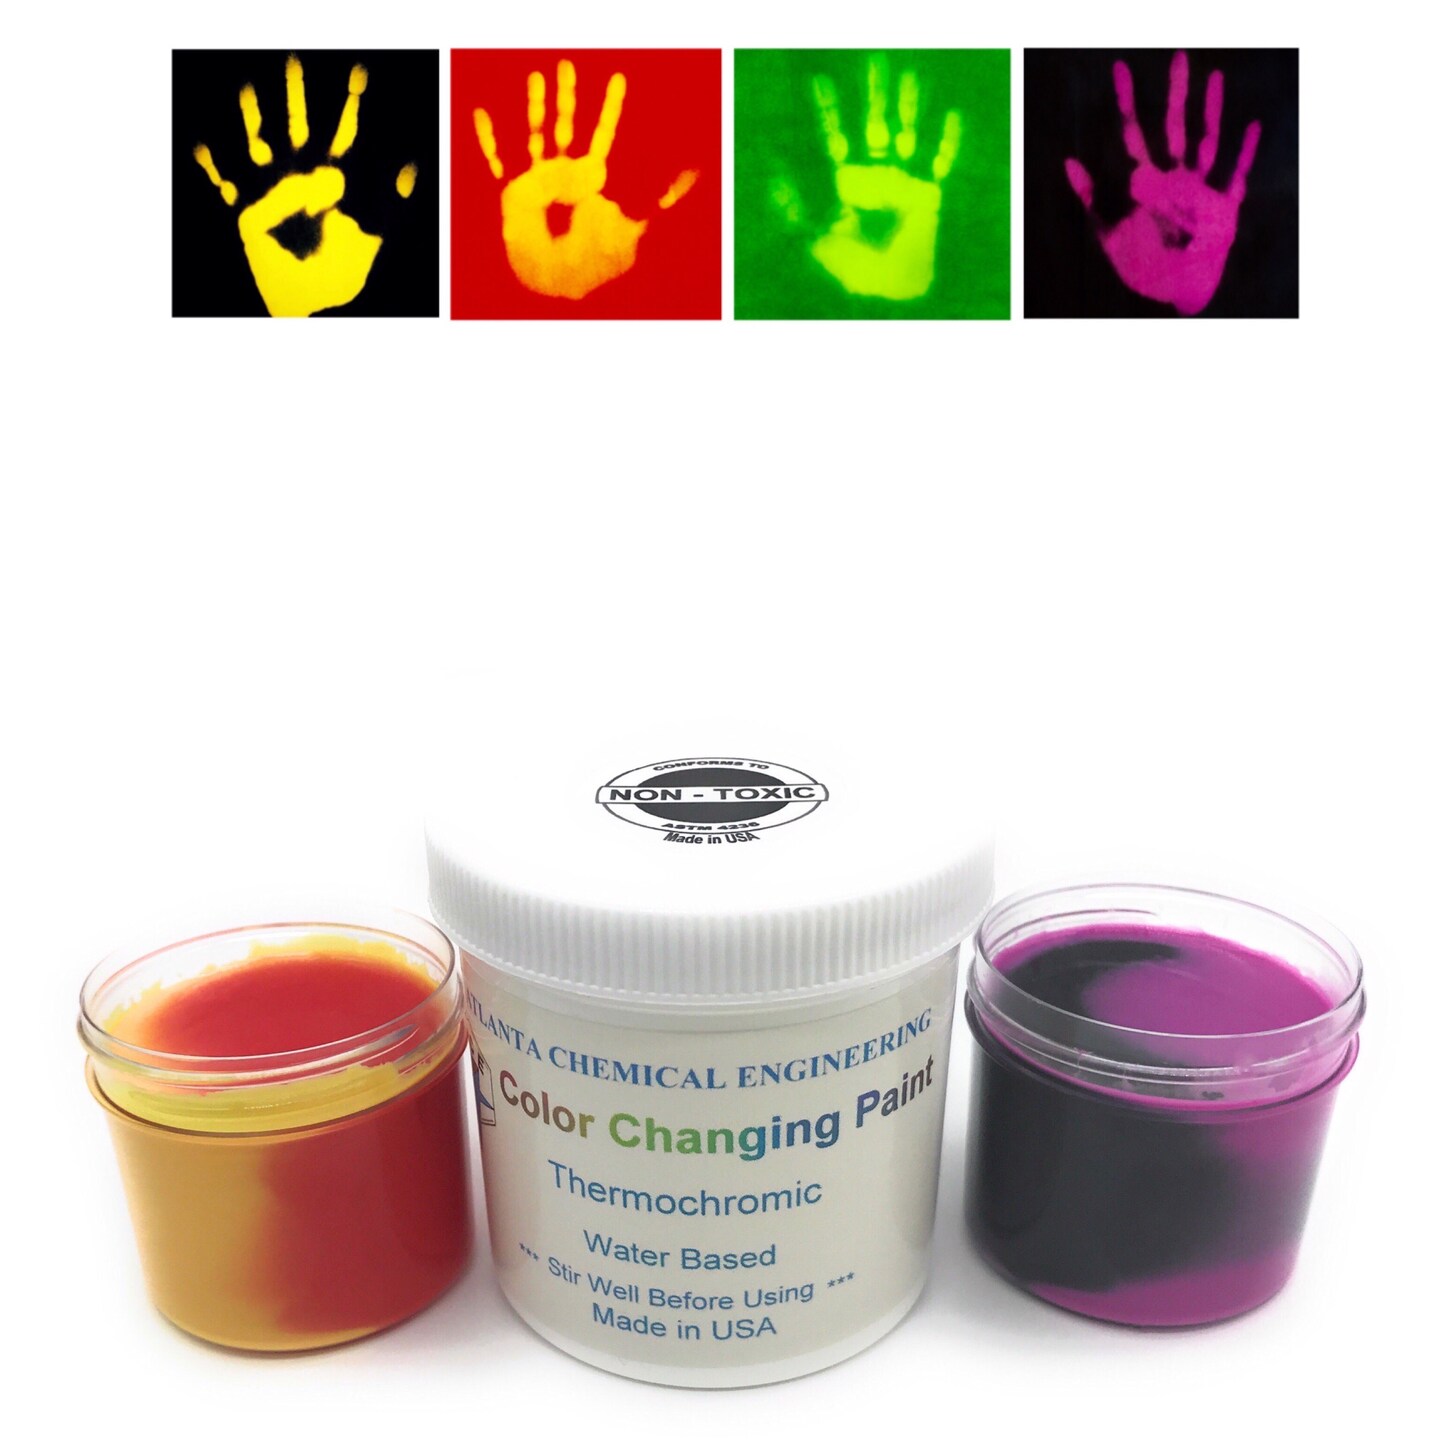 Color Changing Organic Thermochromic Pigment by Insilico(id:11450300)  Product details - View Color Changing Organic Thermochromic Pigment by  Insilico from Insilico Co. Ltd. - EC21 Mobile